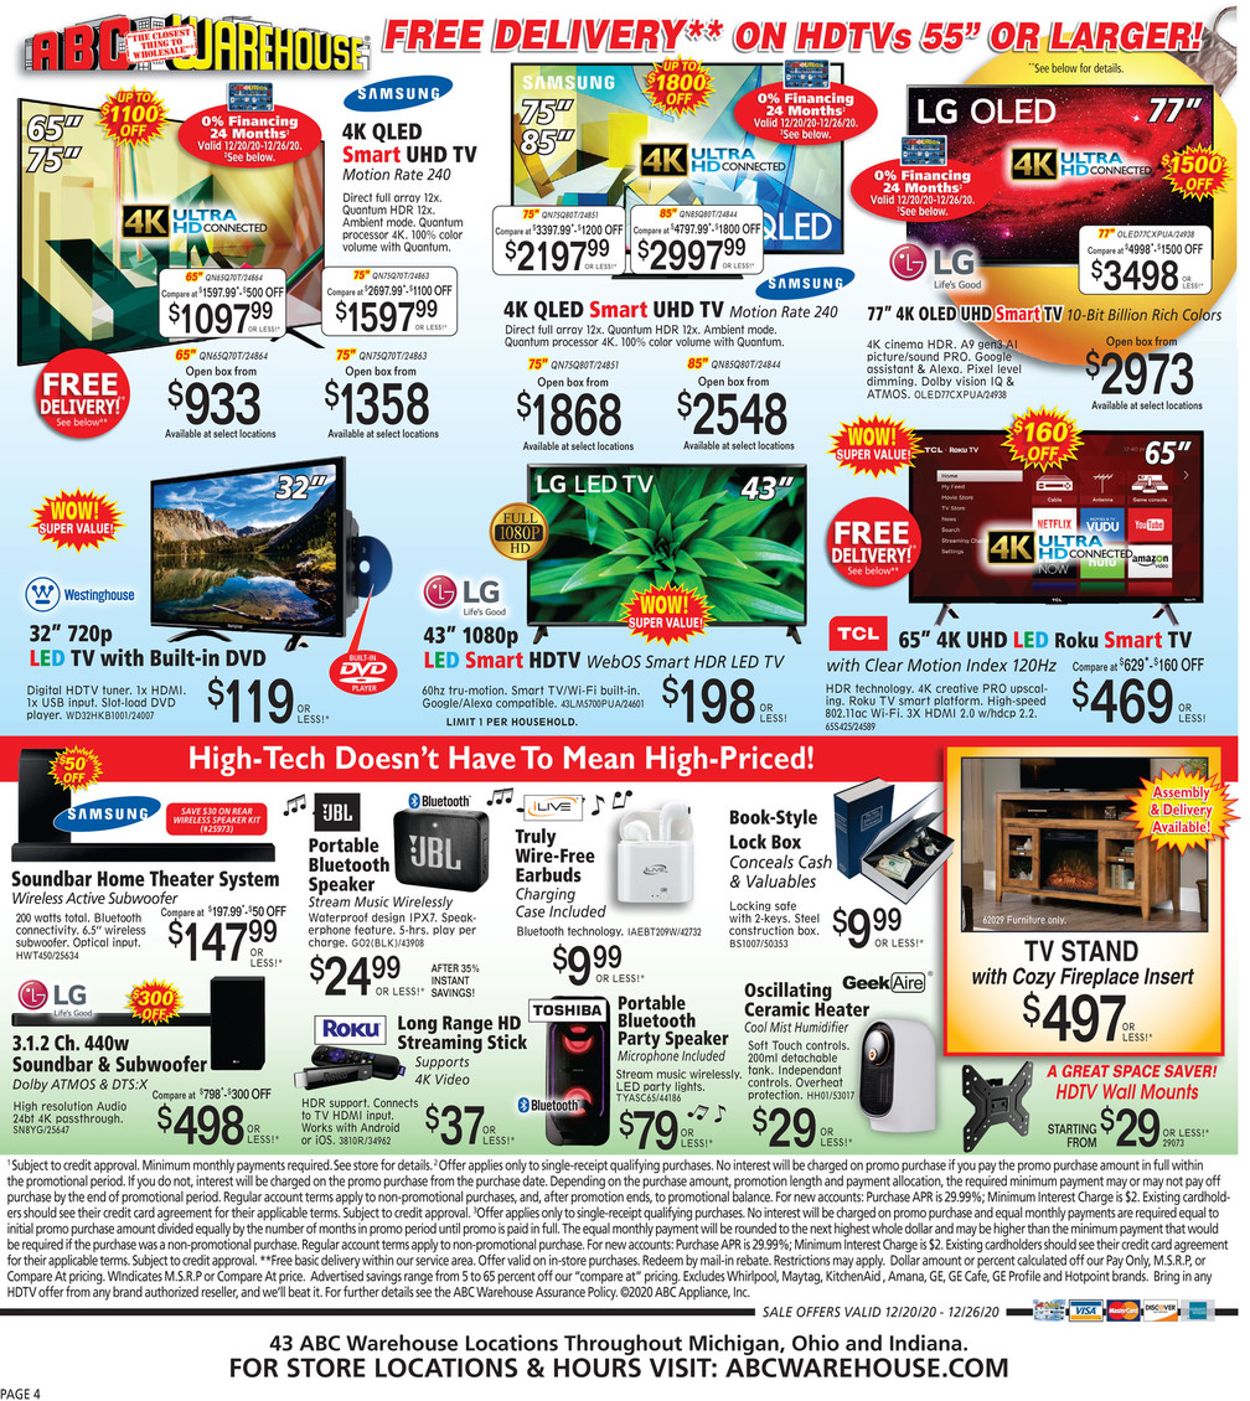 ABC Warehouse Last Minute Sale 2020 Weekly Ad Circular - valid 12/20-12/26/2020 (Page 4)